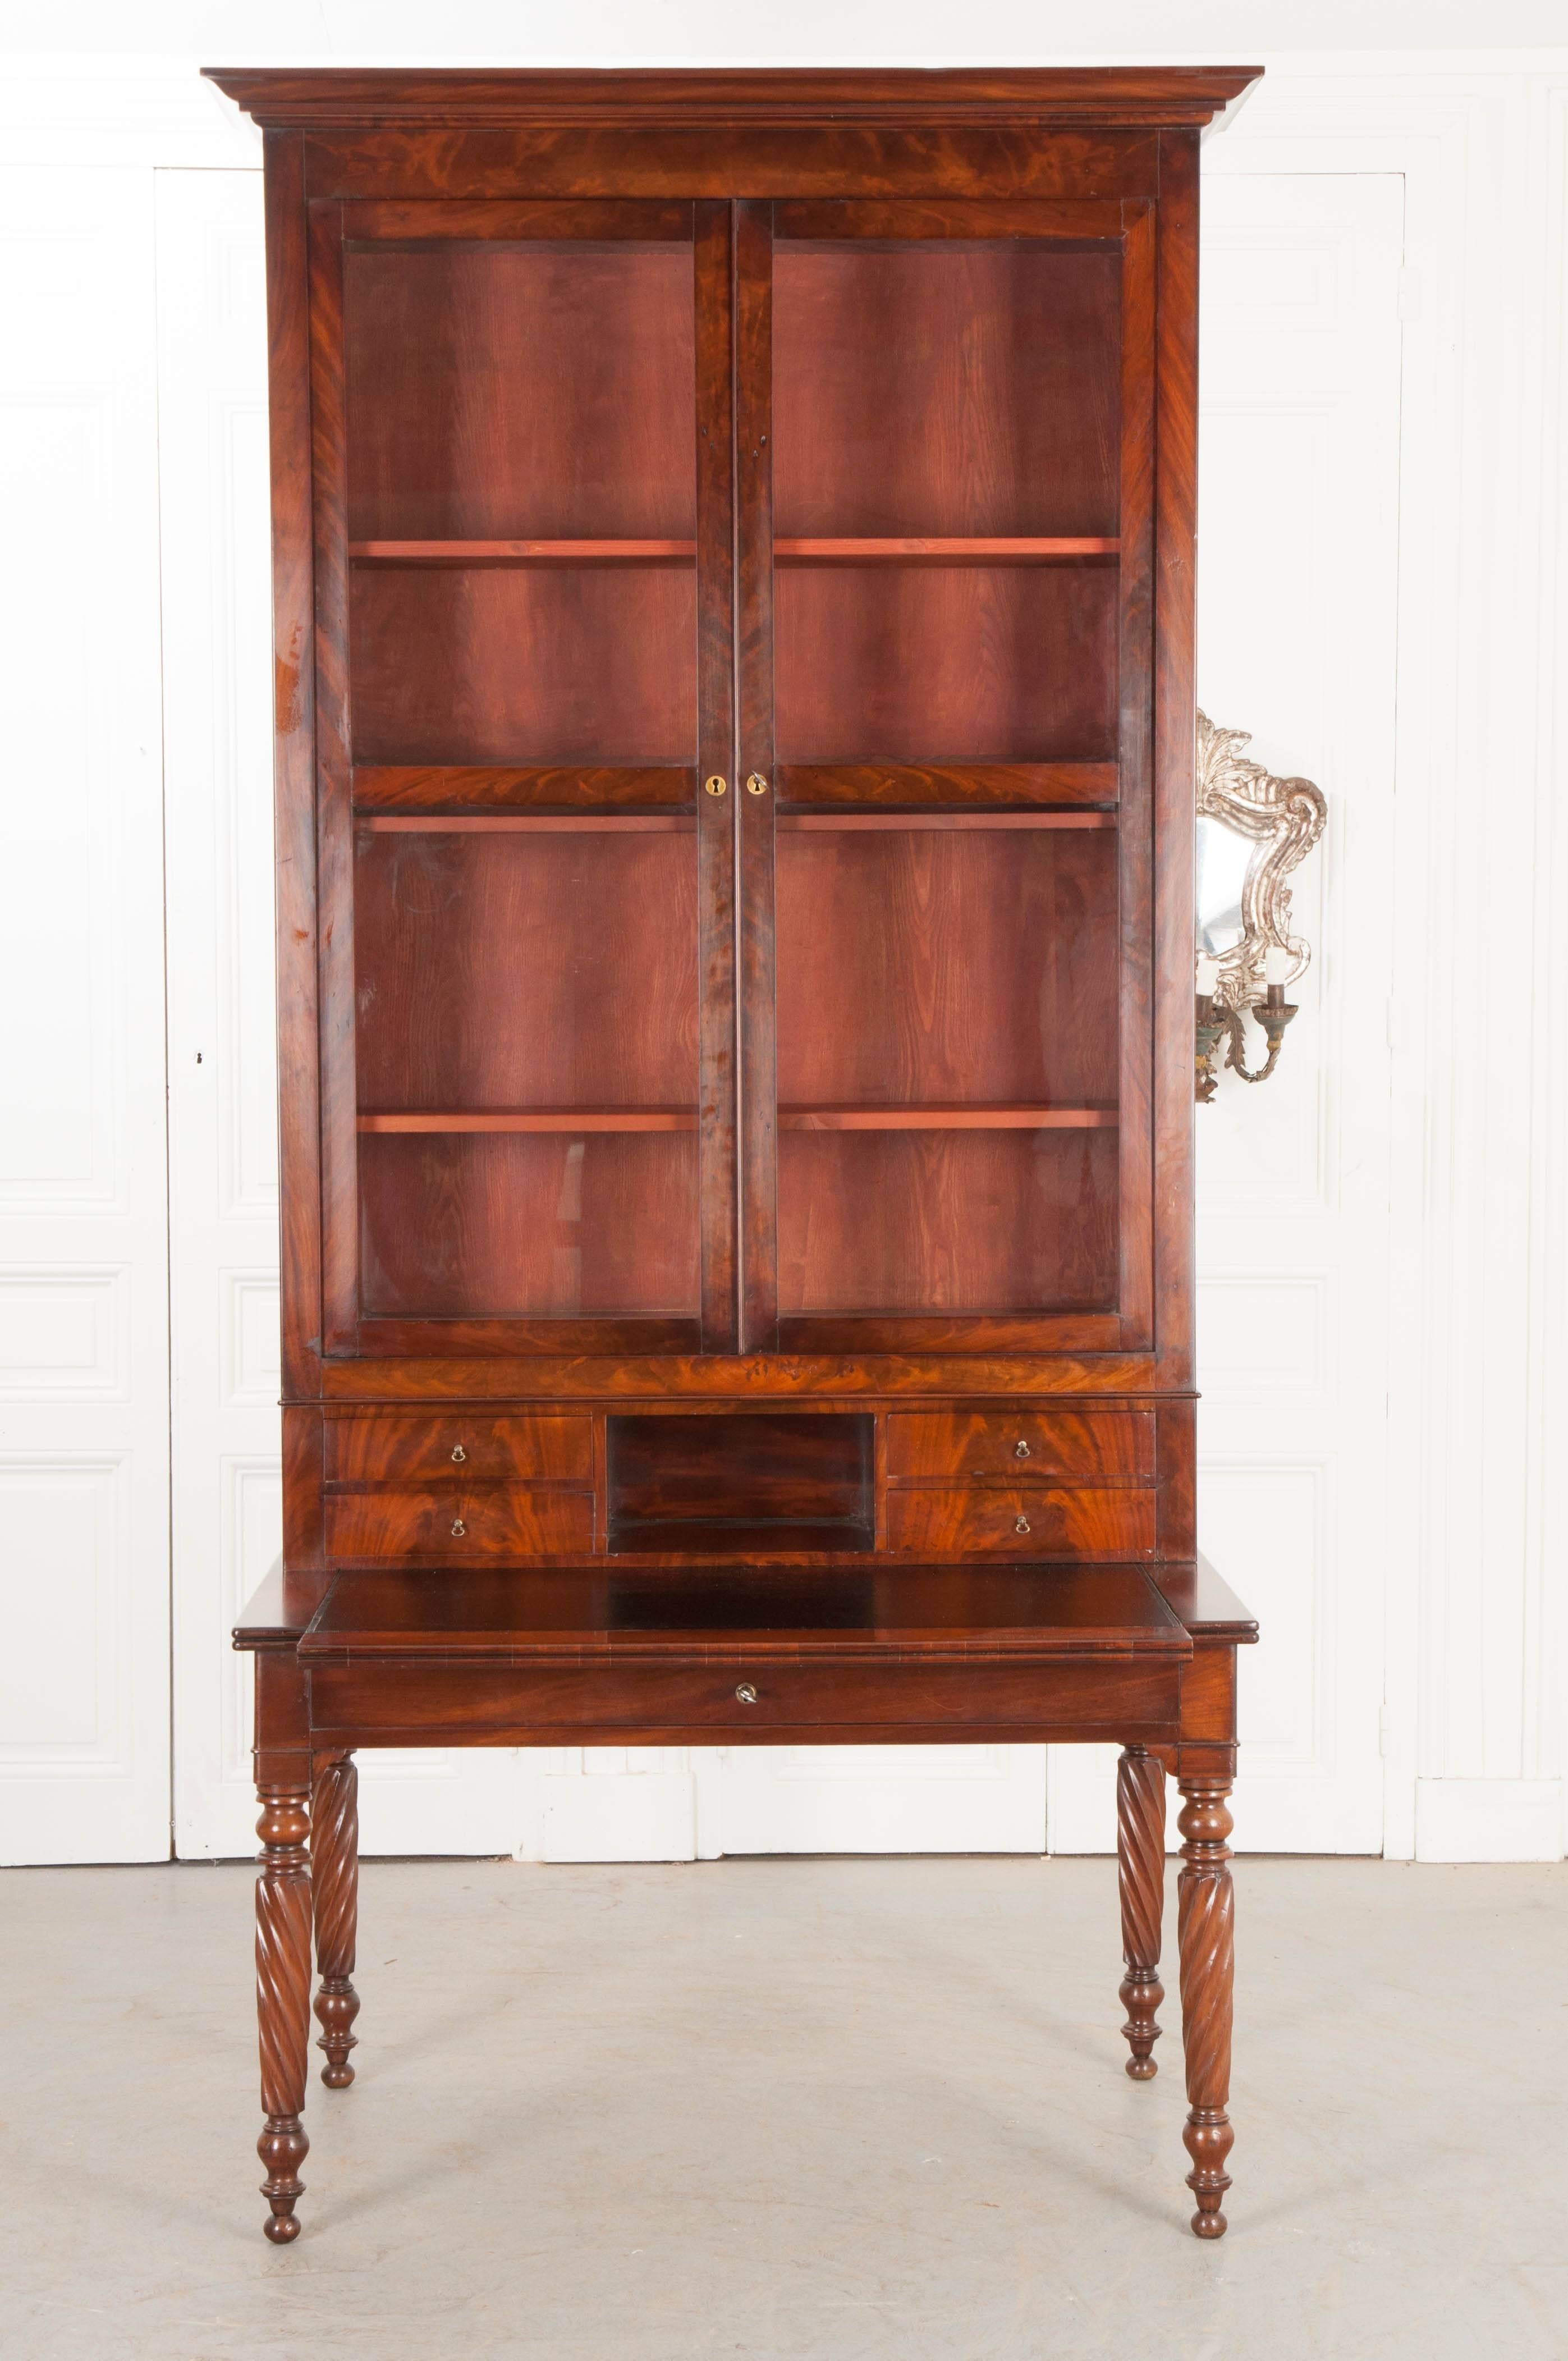 An exceptionally handsome mahogany secretary desk, made in France, circa 1810. The desk was made in the Regency style and is decked in exquisite mahogany veneer. The desk can be separated into two bodies: the lower writing surface, and the upper